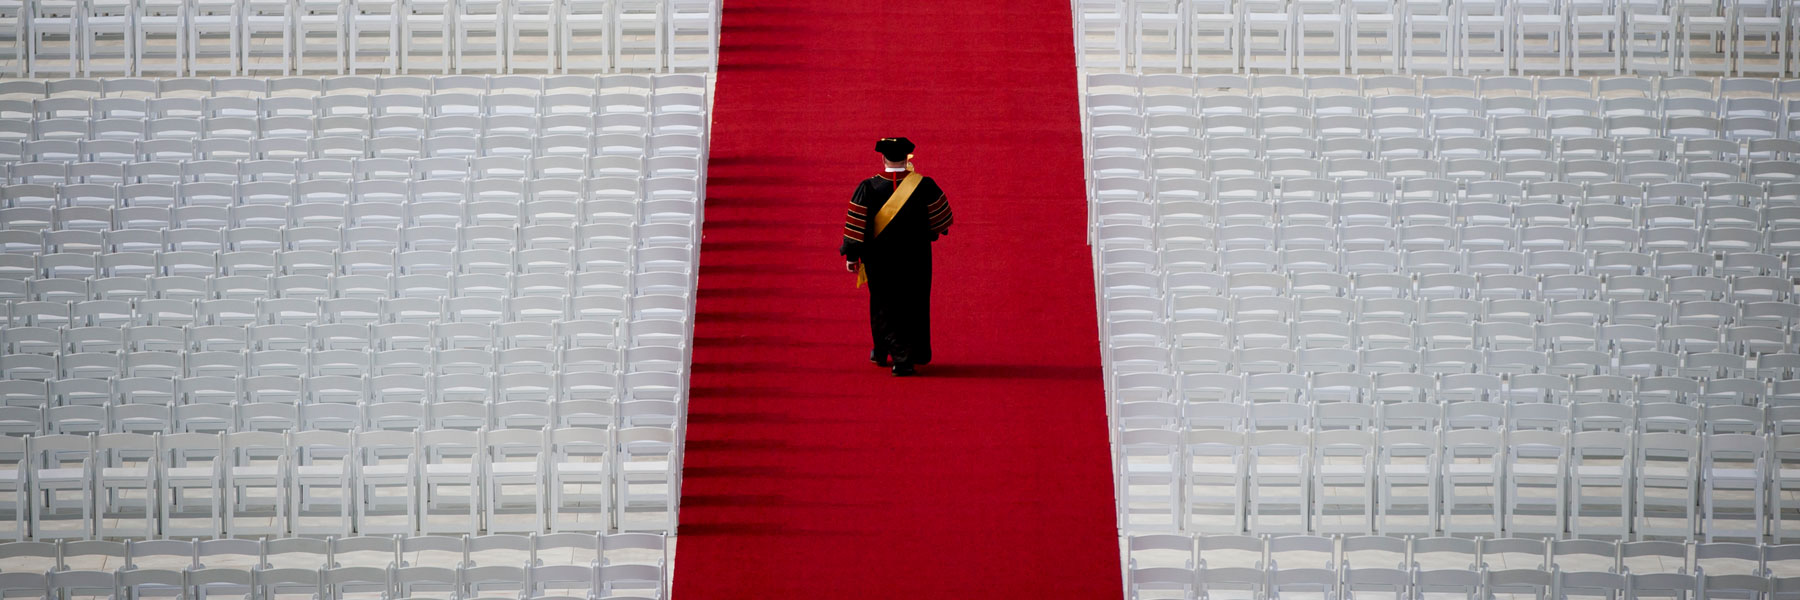 A dramatic aerial photograph of Indiana University's Grand Marshal walking down a red carpet. He is flanked by rows of  empty white seats. 